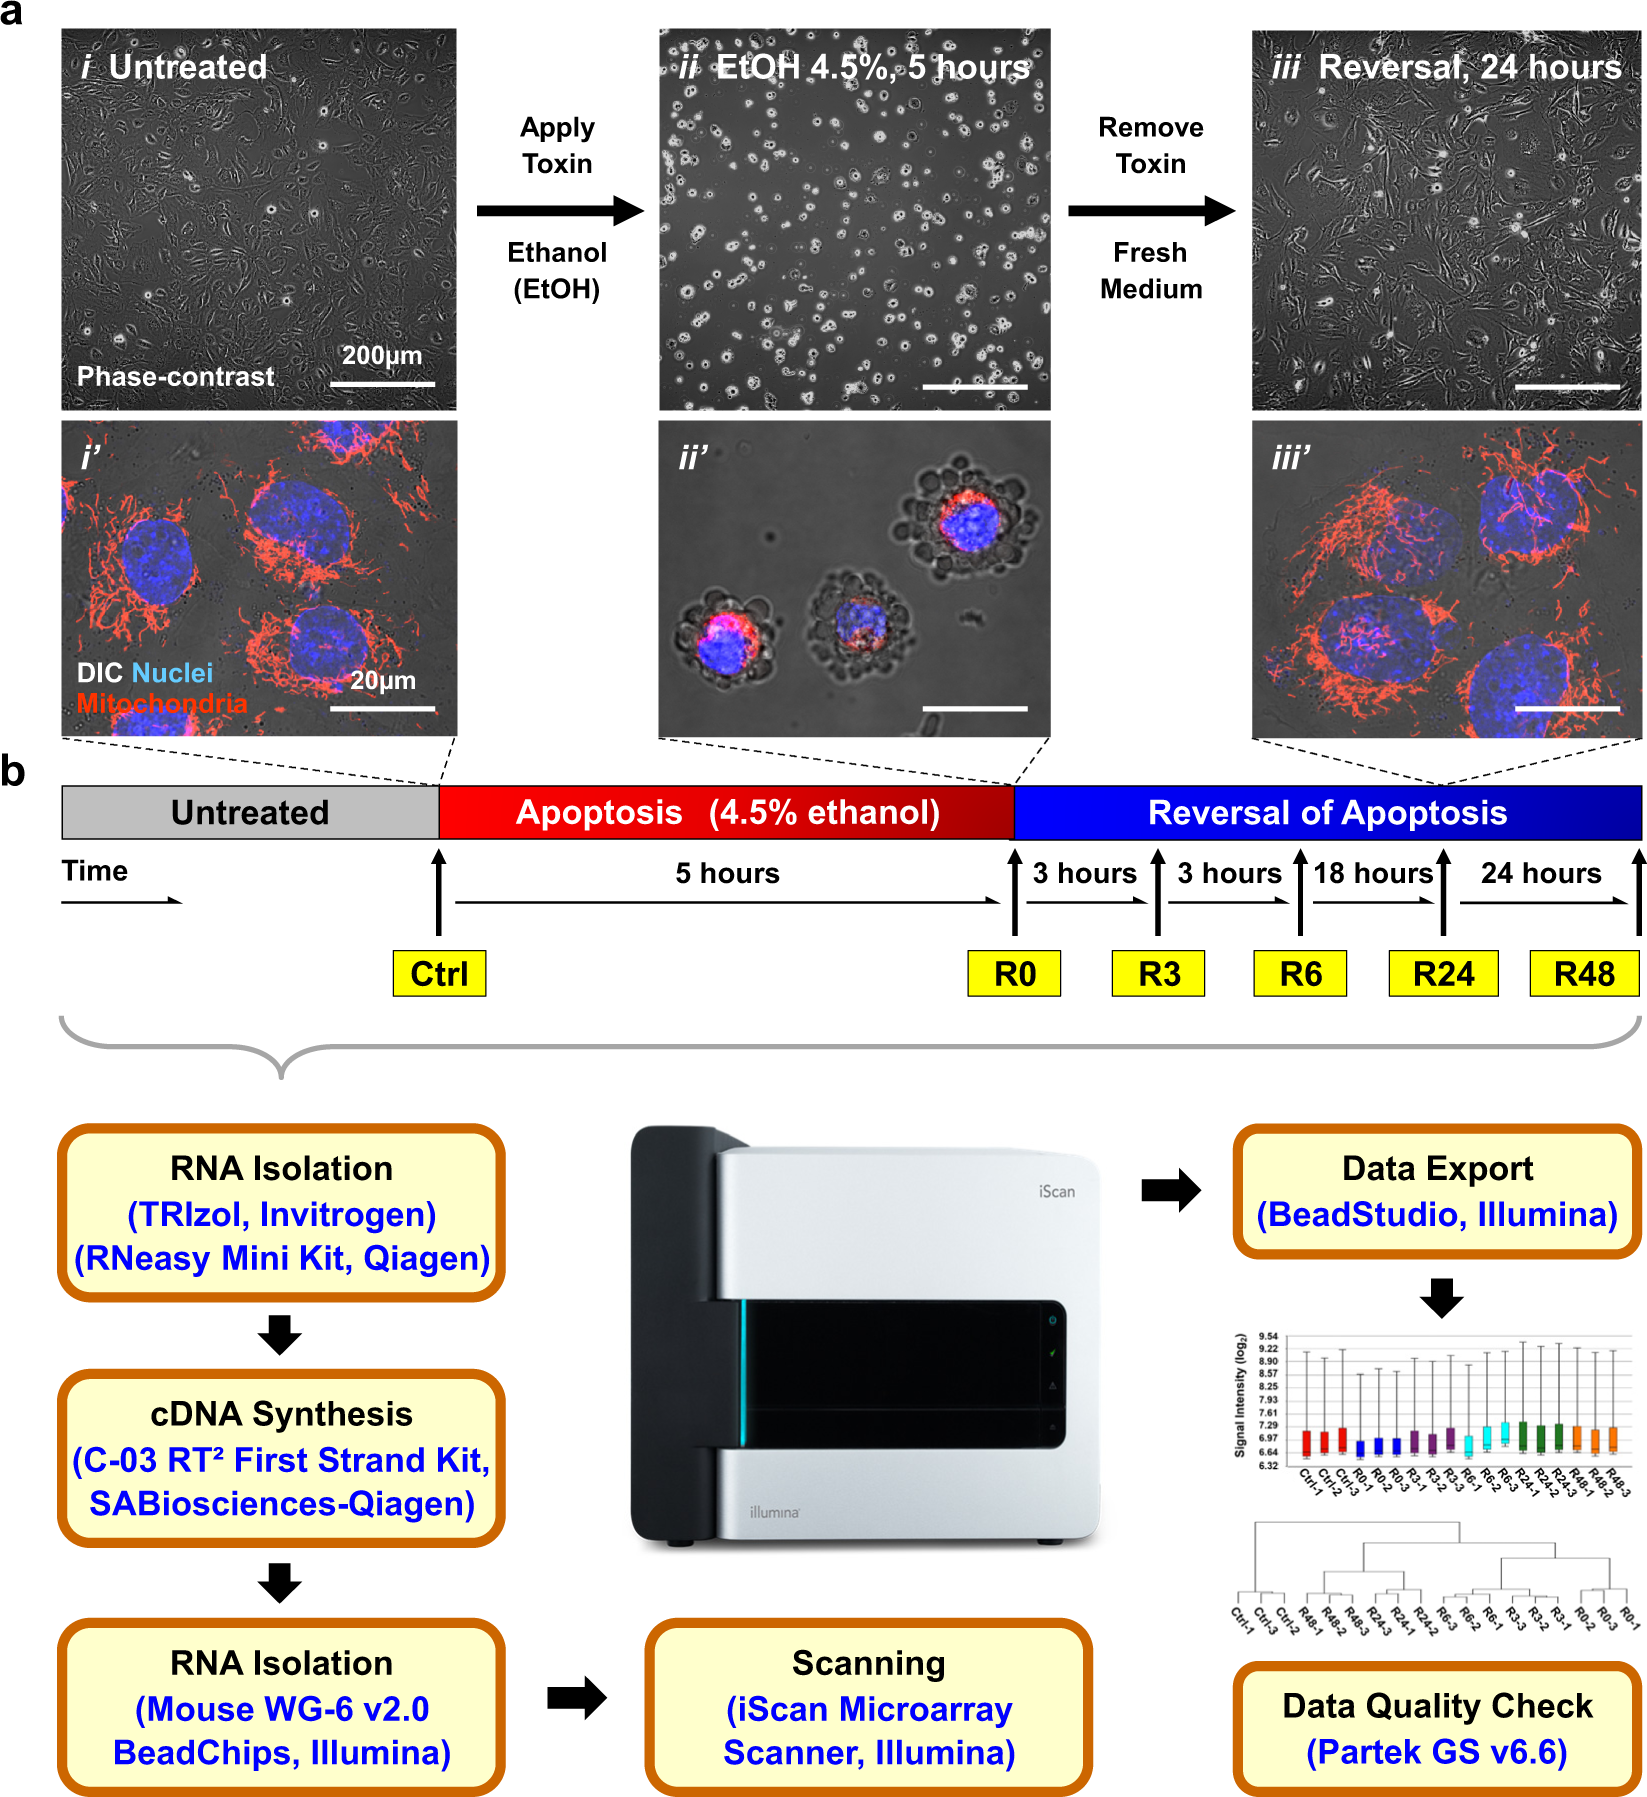 Transcriptomic study of anastasis for reversal of ethanol-induced apoptosis  in mouse primary liver cells | Scientific Data